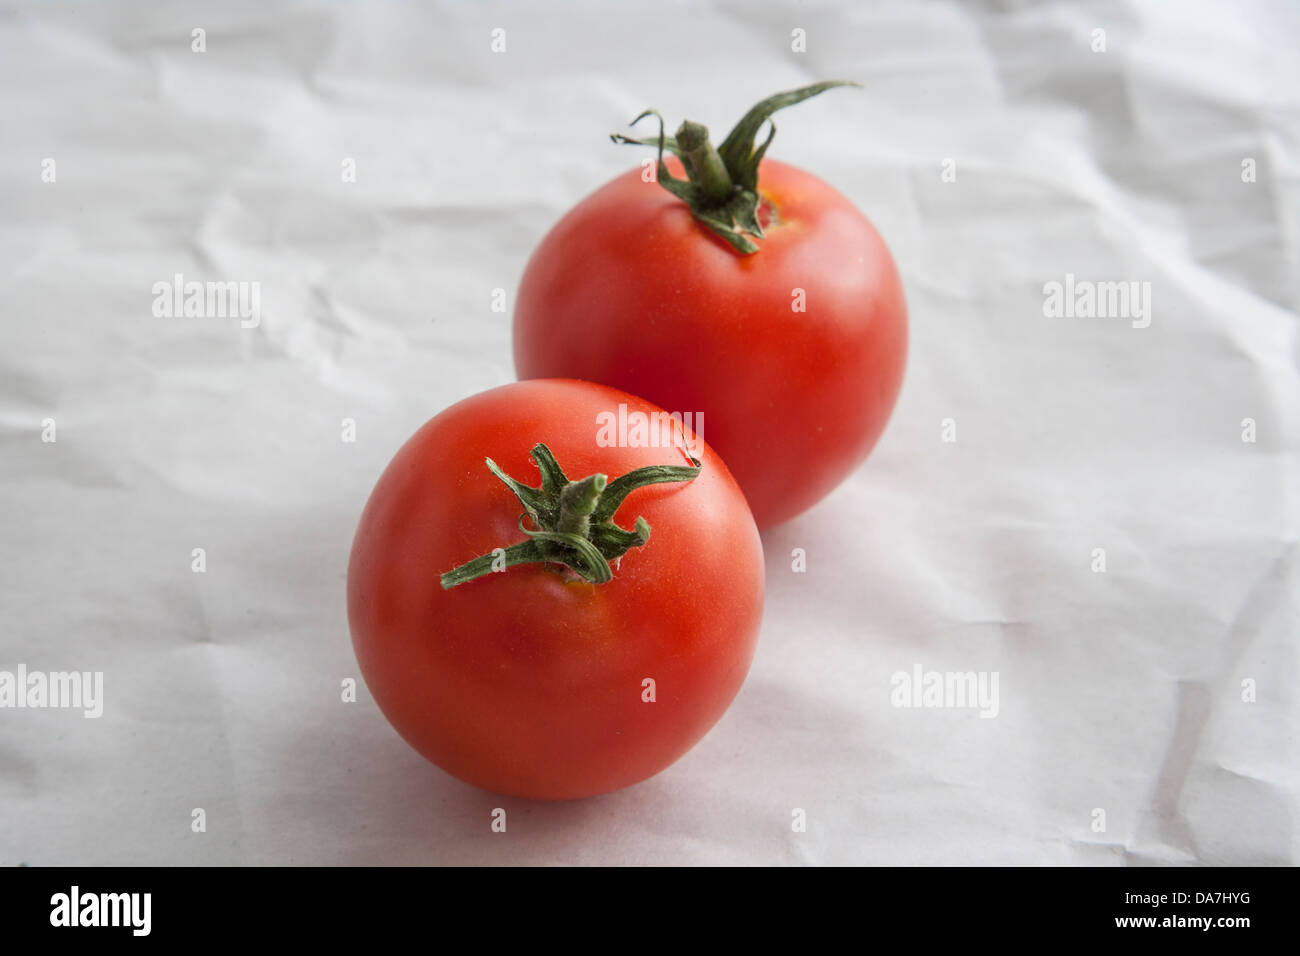 red ripe tomatoes on butcher paper Stock Photo